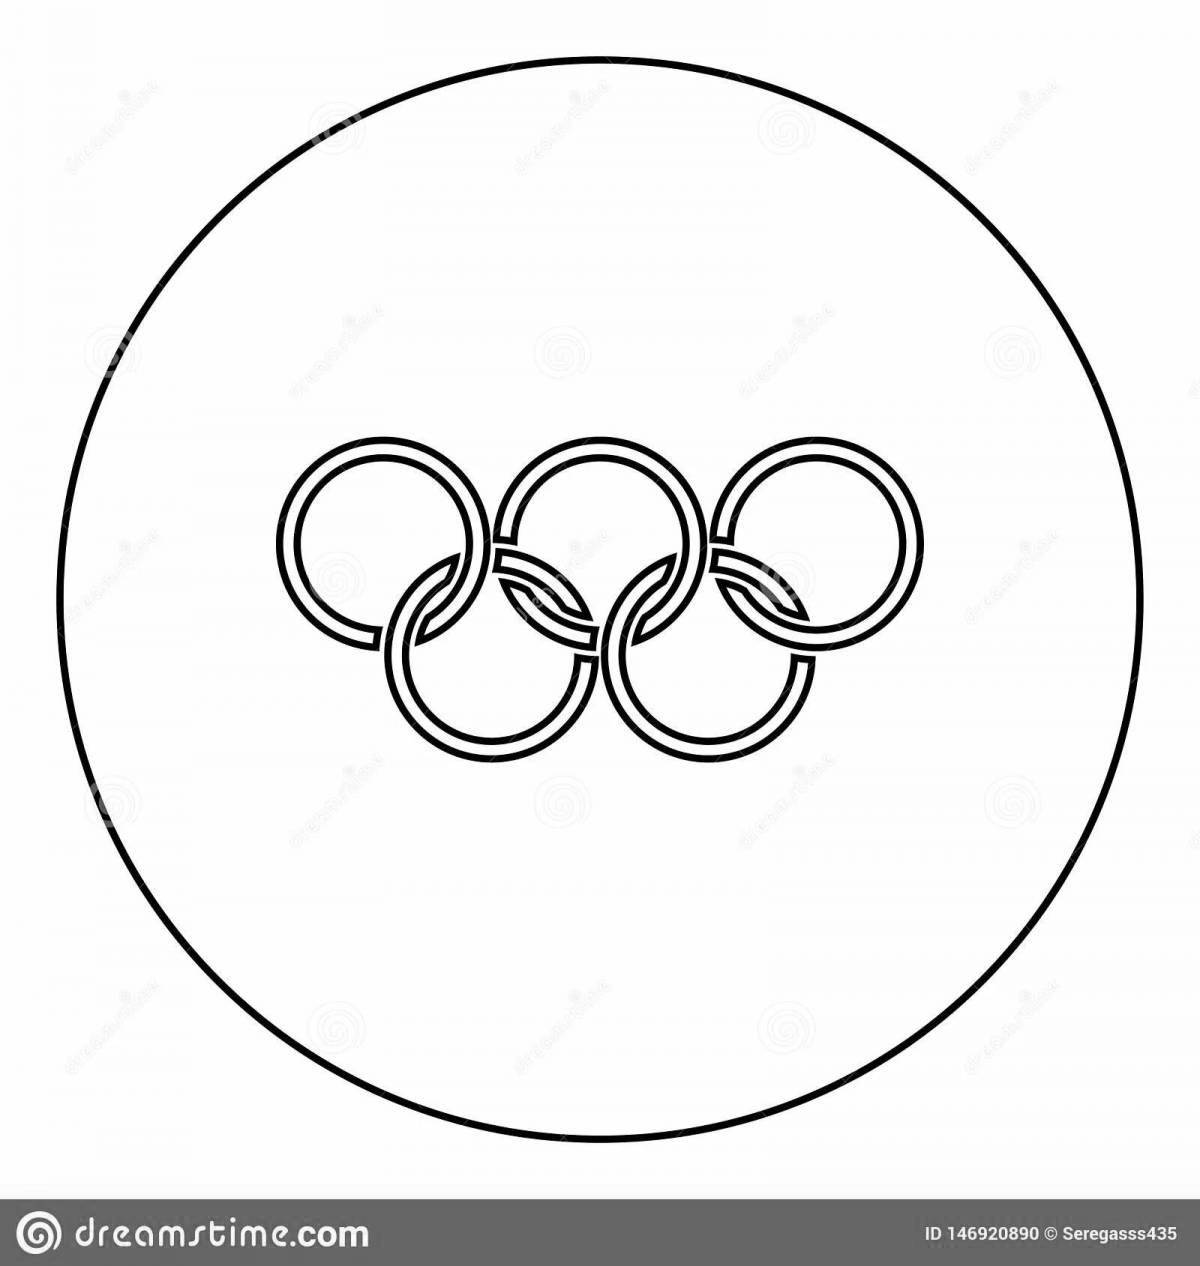 Fun coloring of the Olympic rings for the little ones